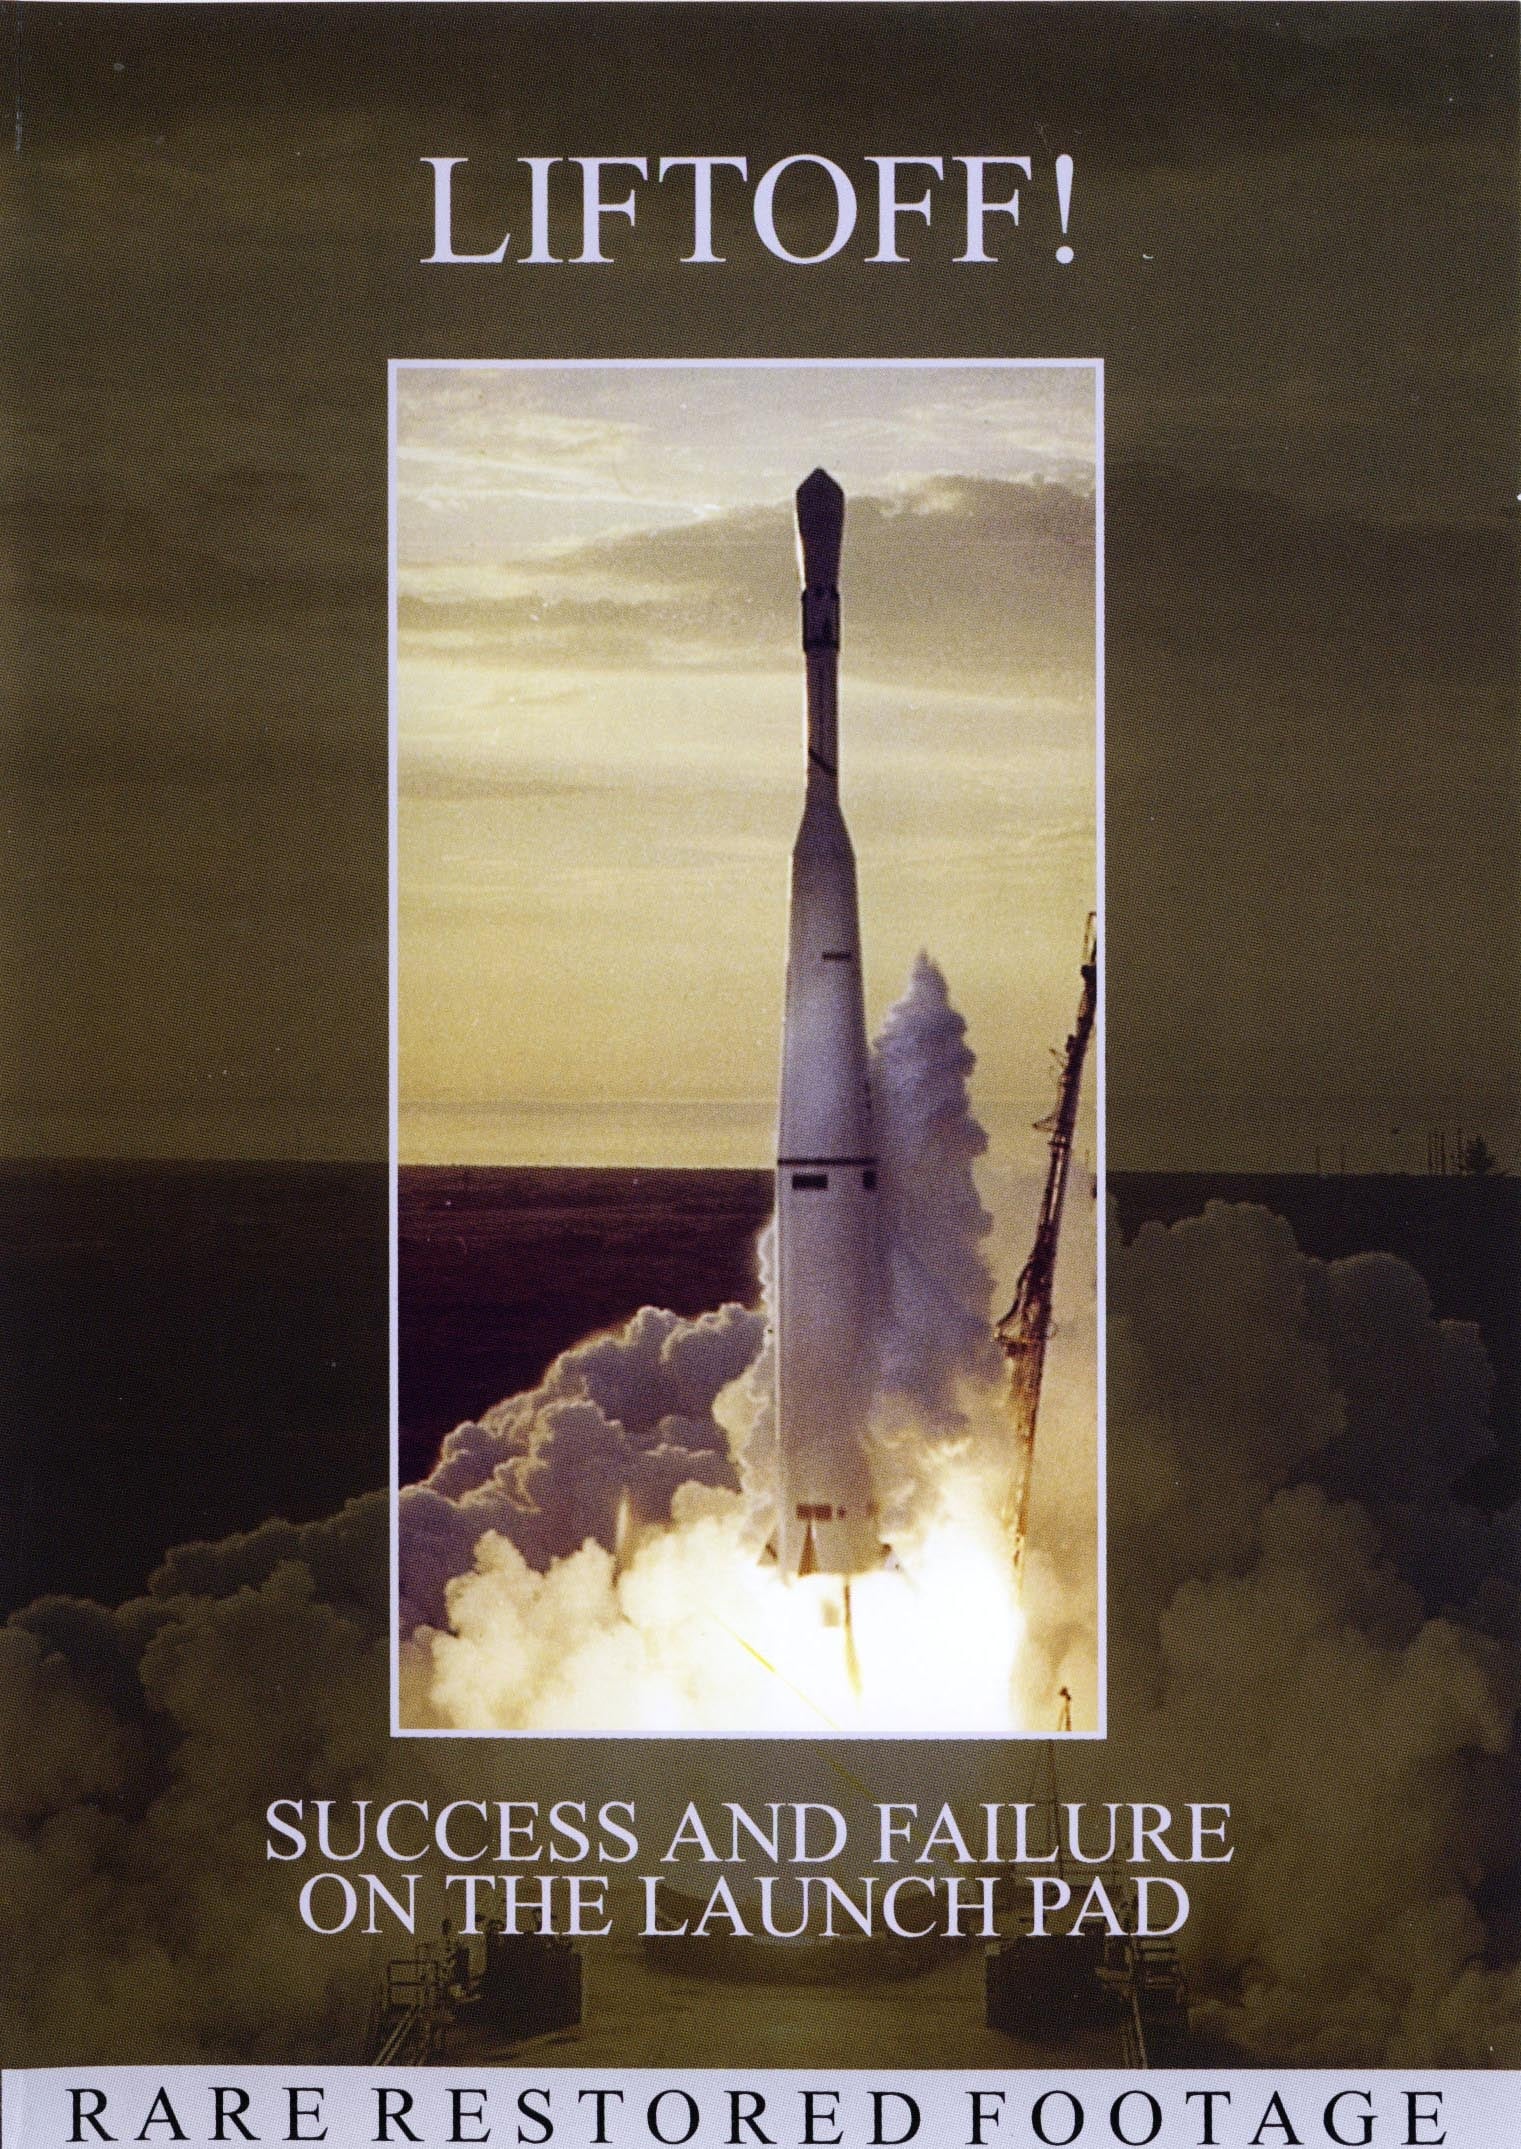 Liftoff!: Success and Failure on the Launch Pad